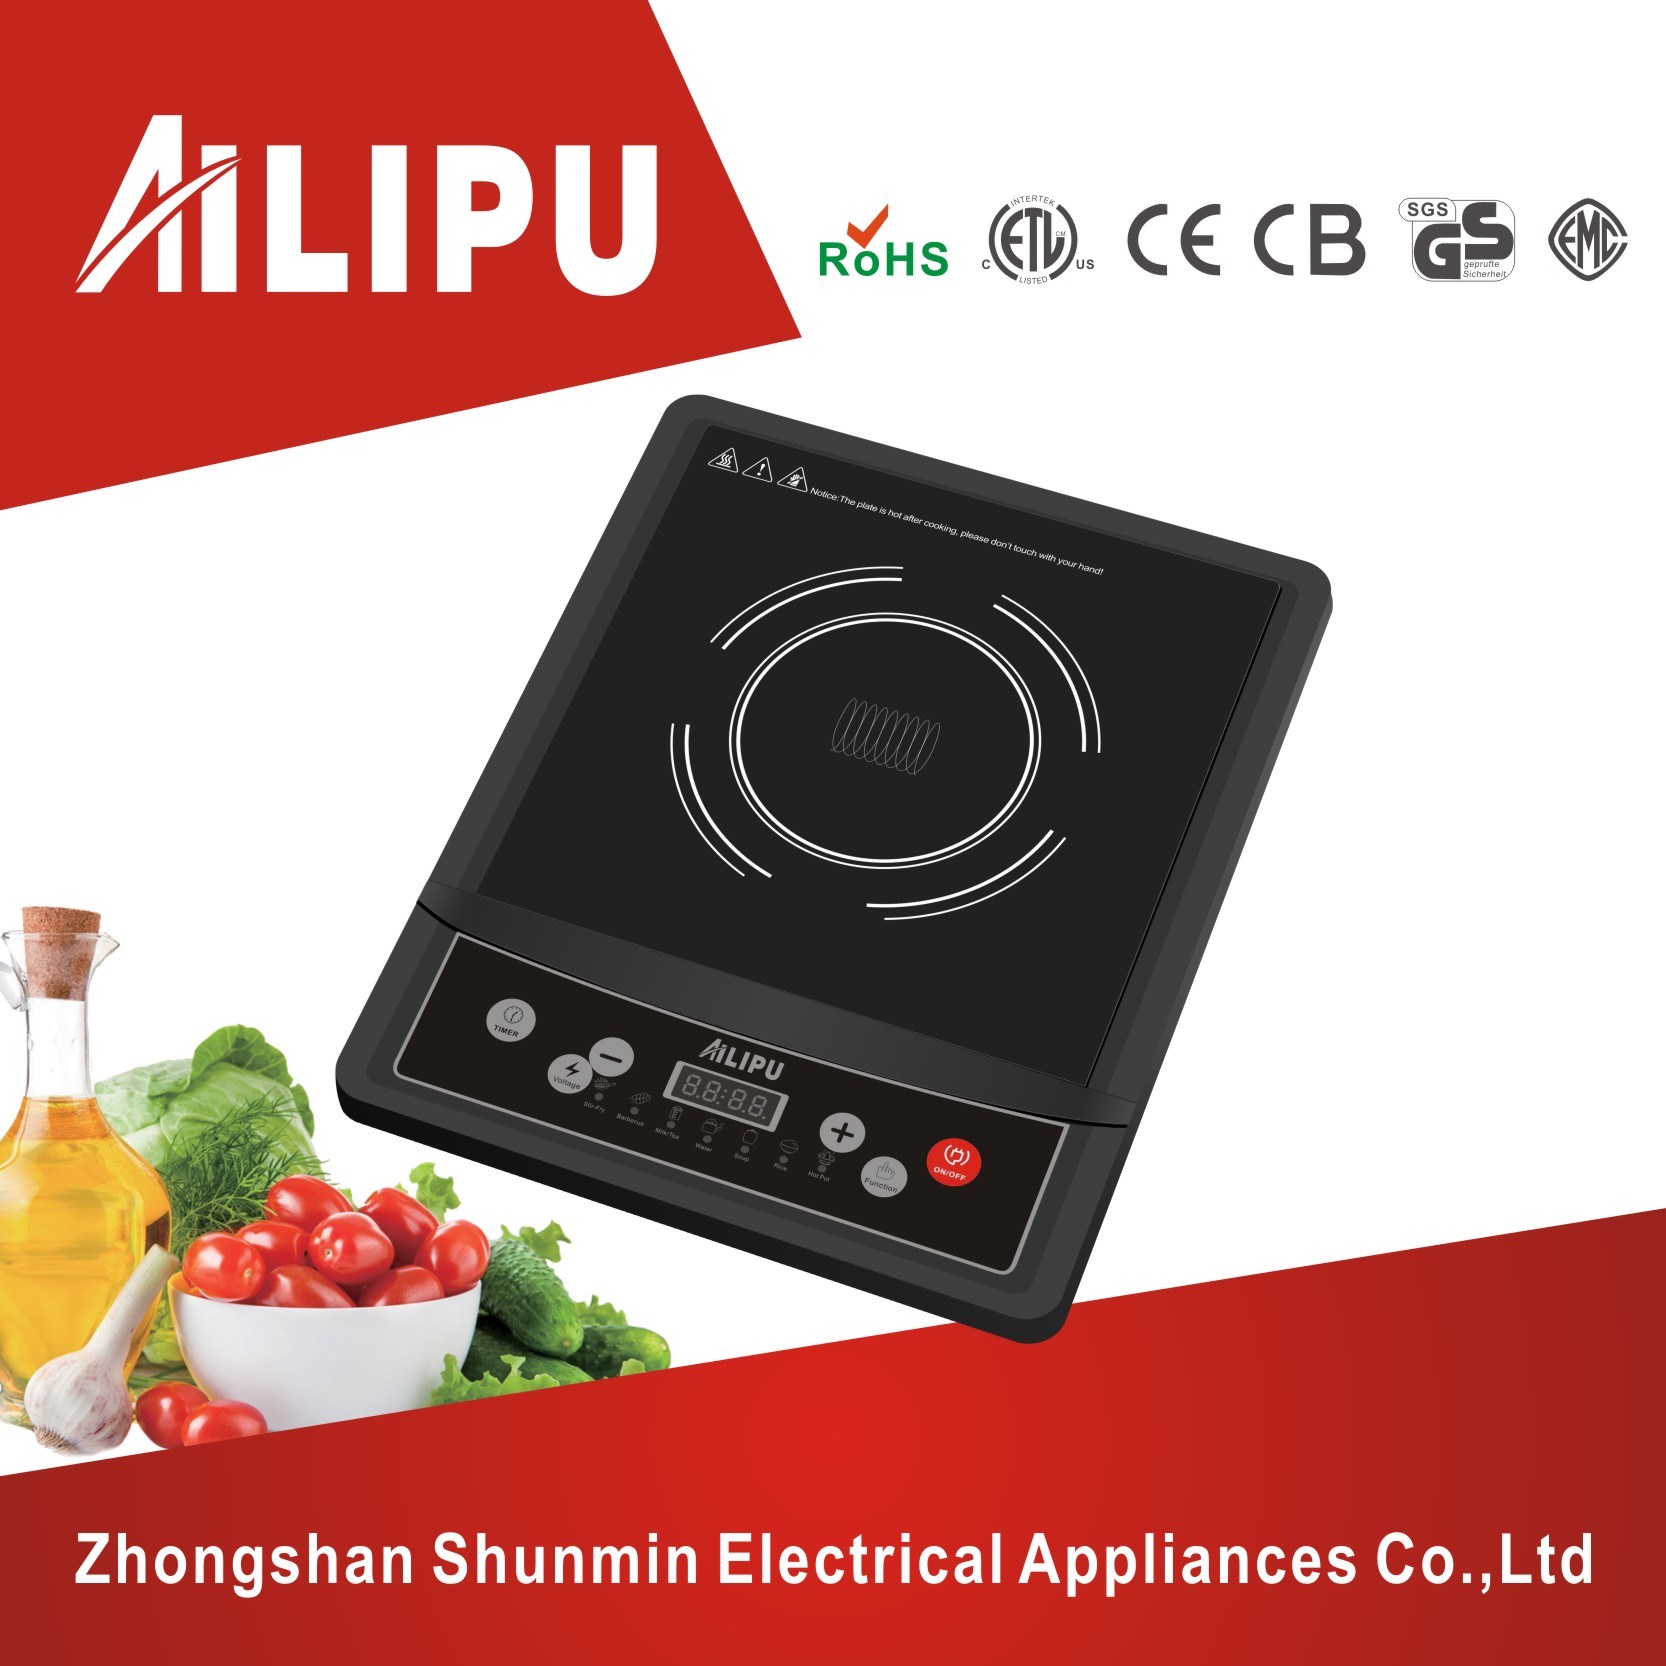 CB Certificate and Plastic Housing 1800W Portable Induction Cooker